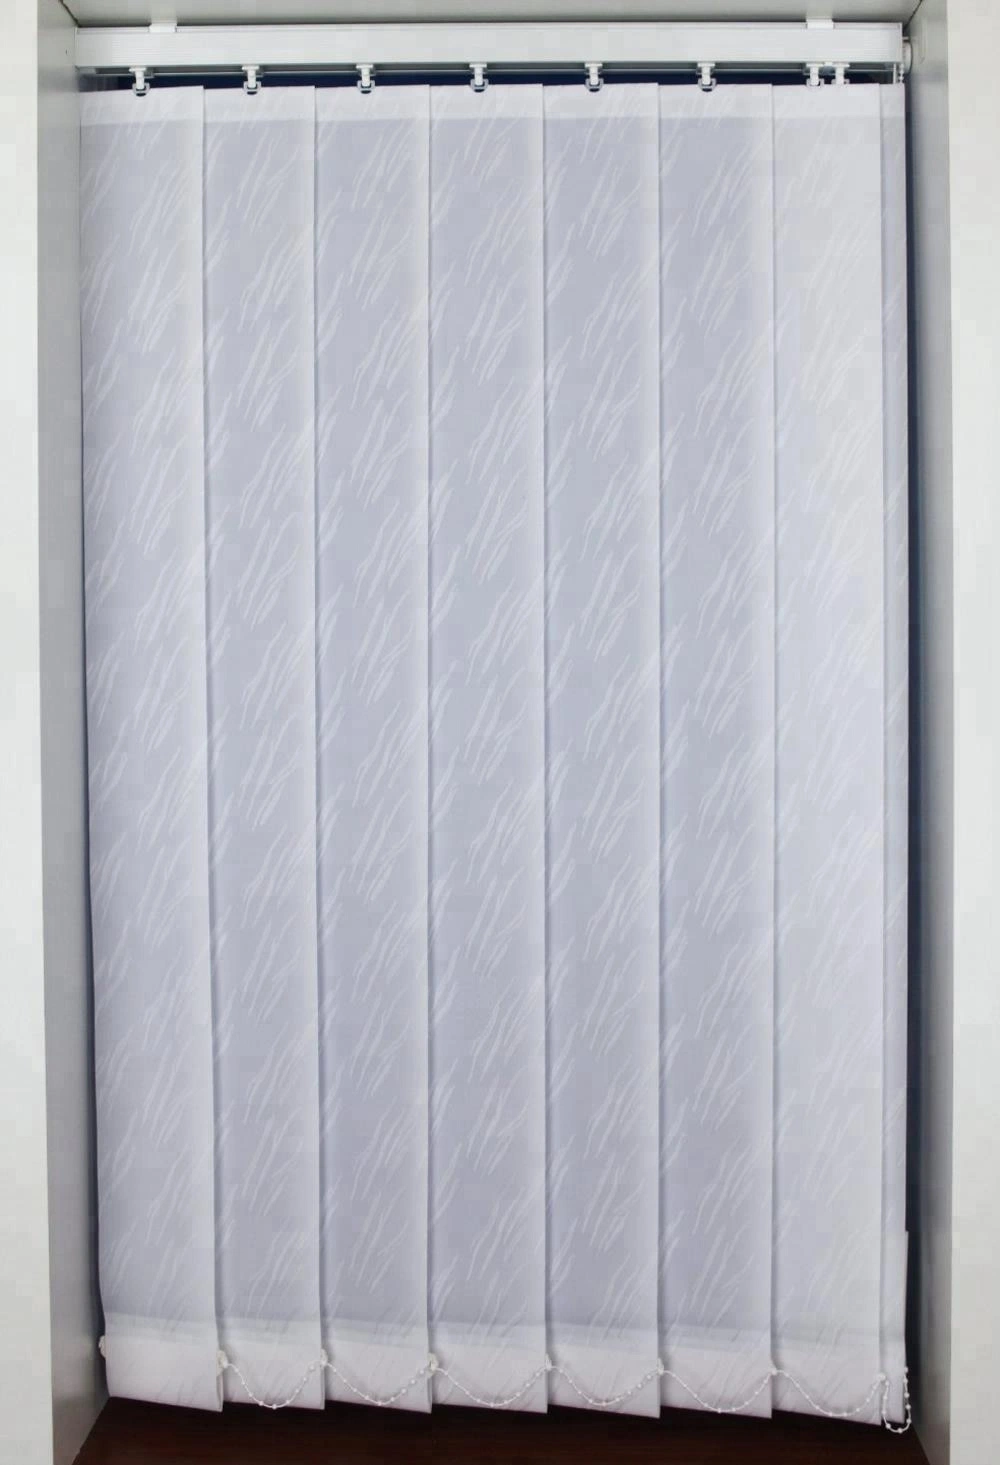 Polyester Fabric Vertical Blinds Manual or Motorized Metallic Make Building Material